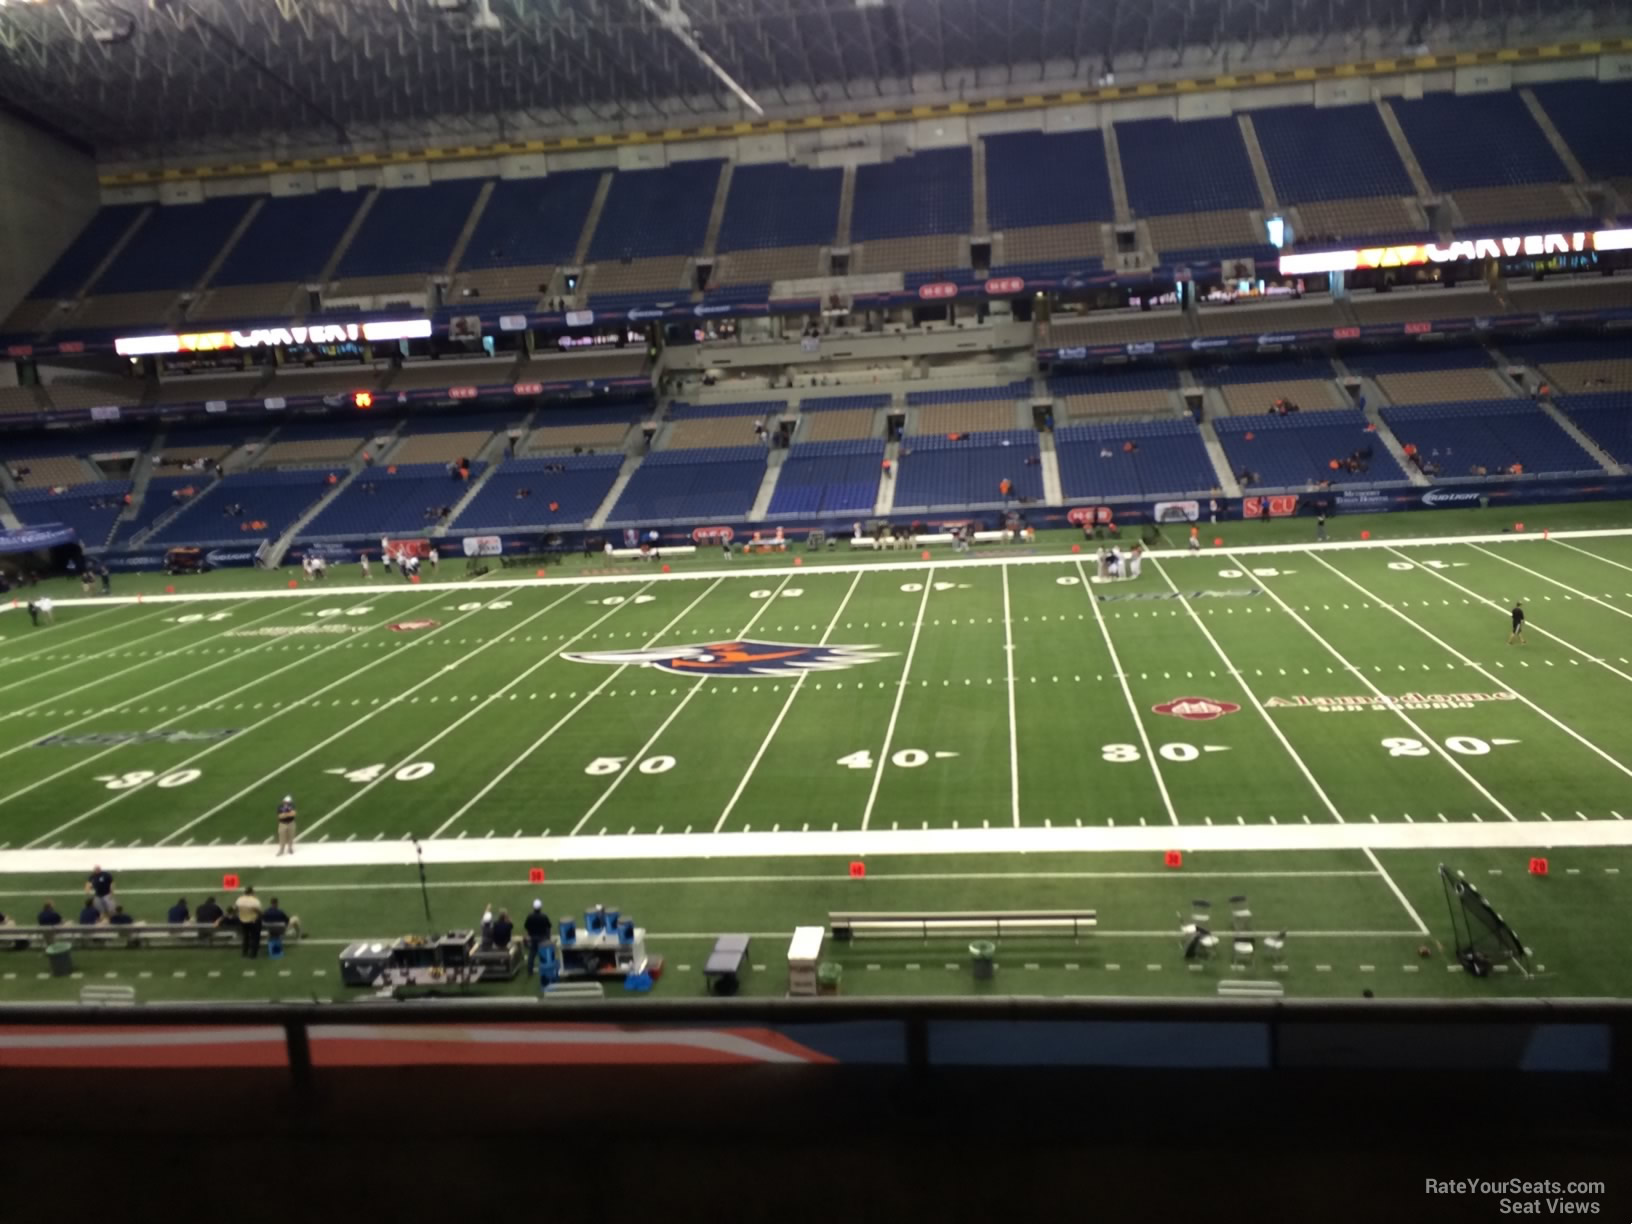 section 233, row 5 seat view  for football - alamodome